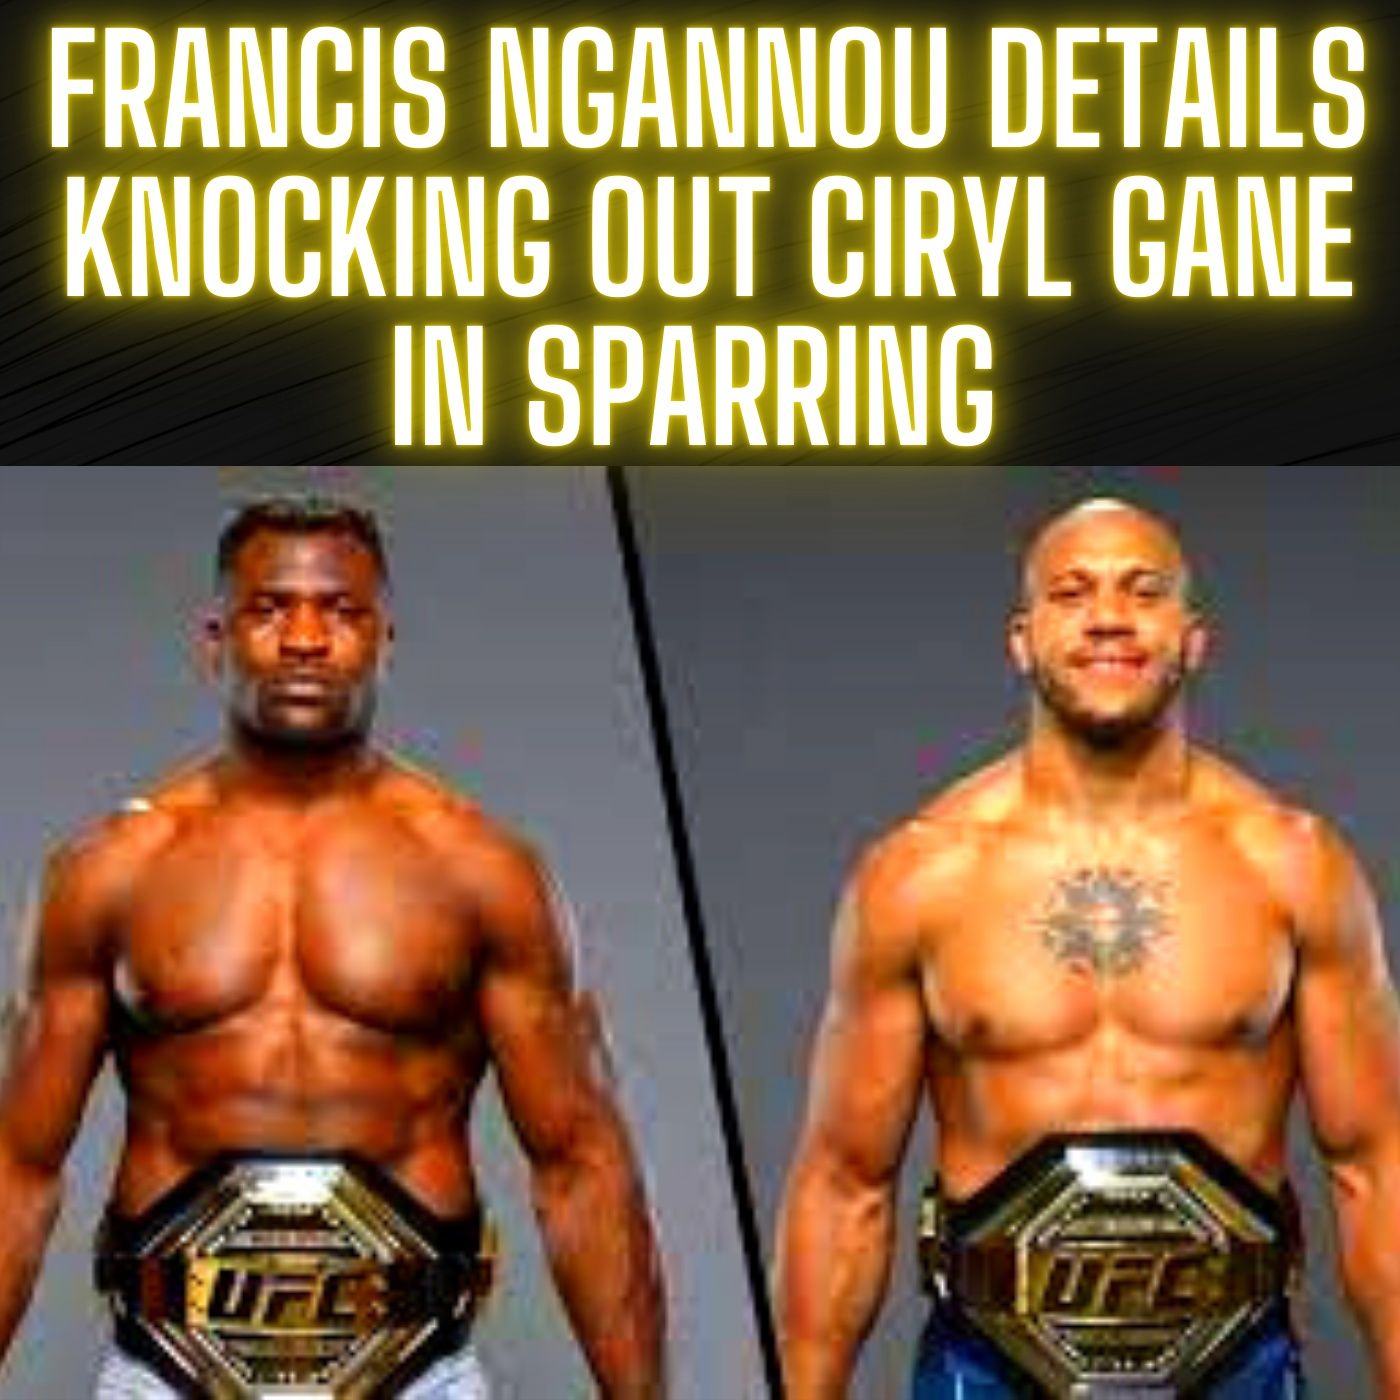 Francis Ngannou Details Knocking Out Ciryl Gane in Sparring Years Ago INTERVIEW | UFC 270